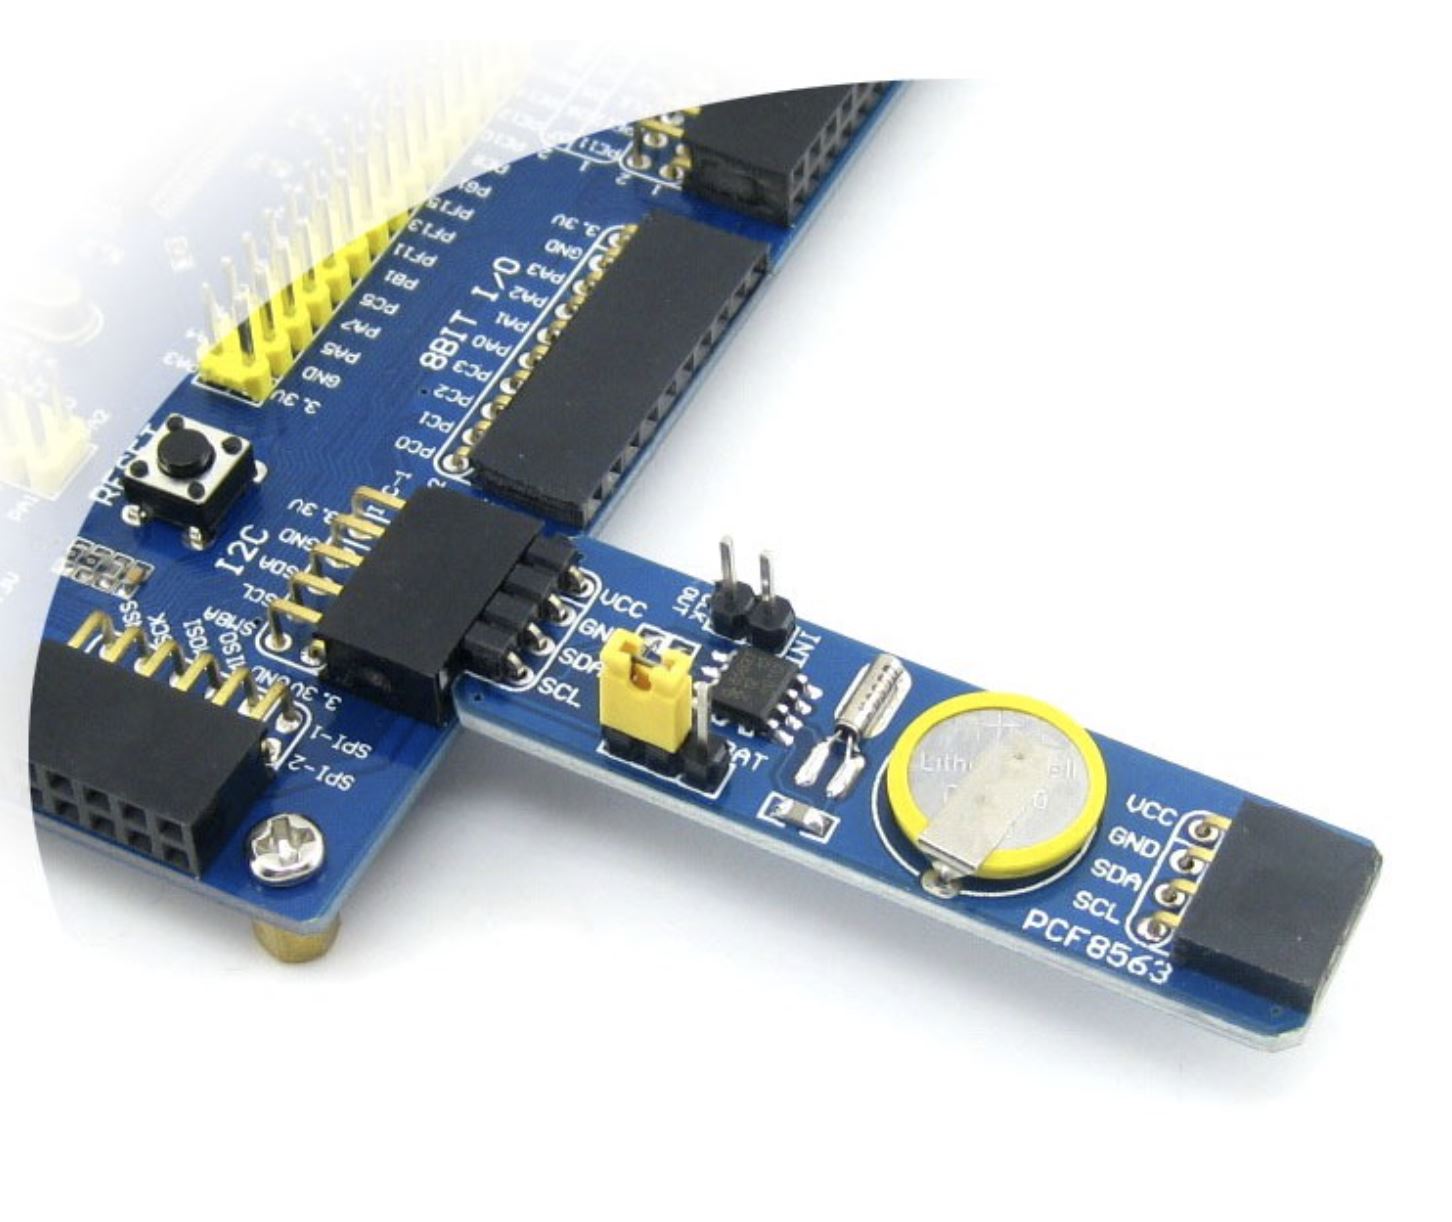 PCF8563 RTC Real Time Clock Module